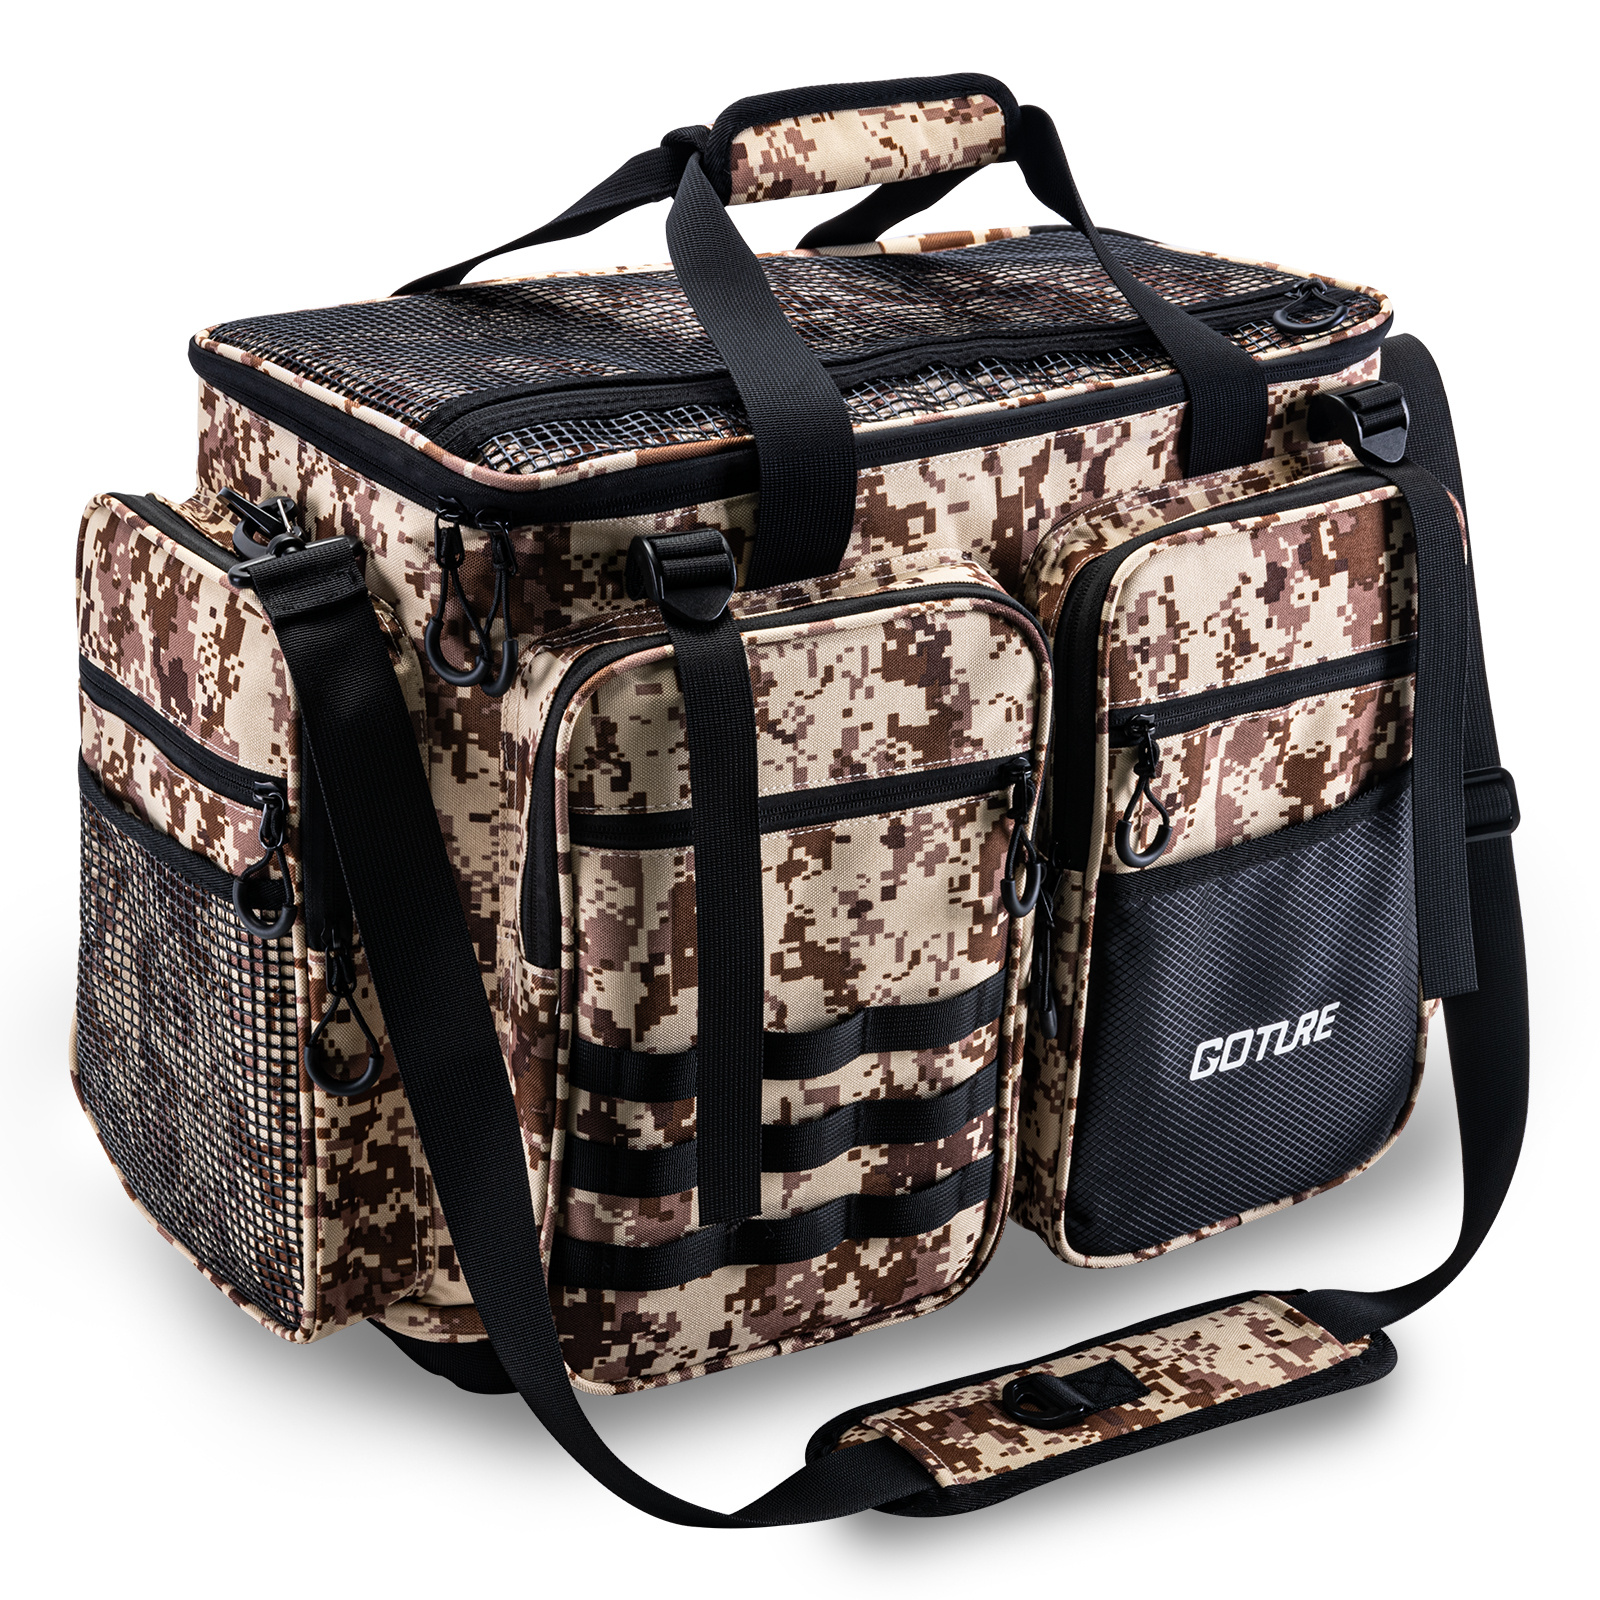 Surf To Summit Fishing Tackle Bag, Large Saltwater Resistant